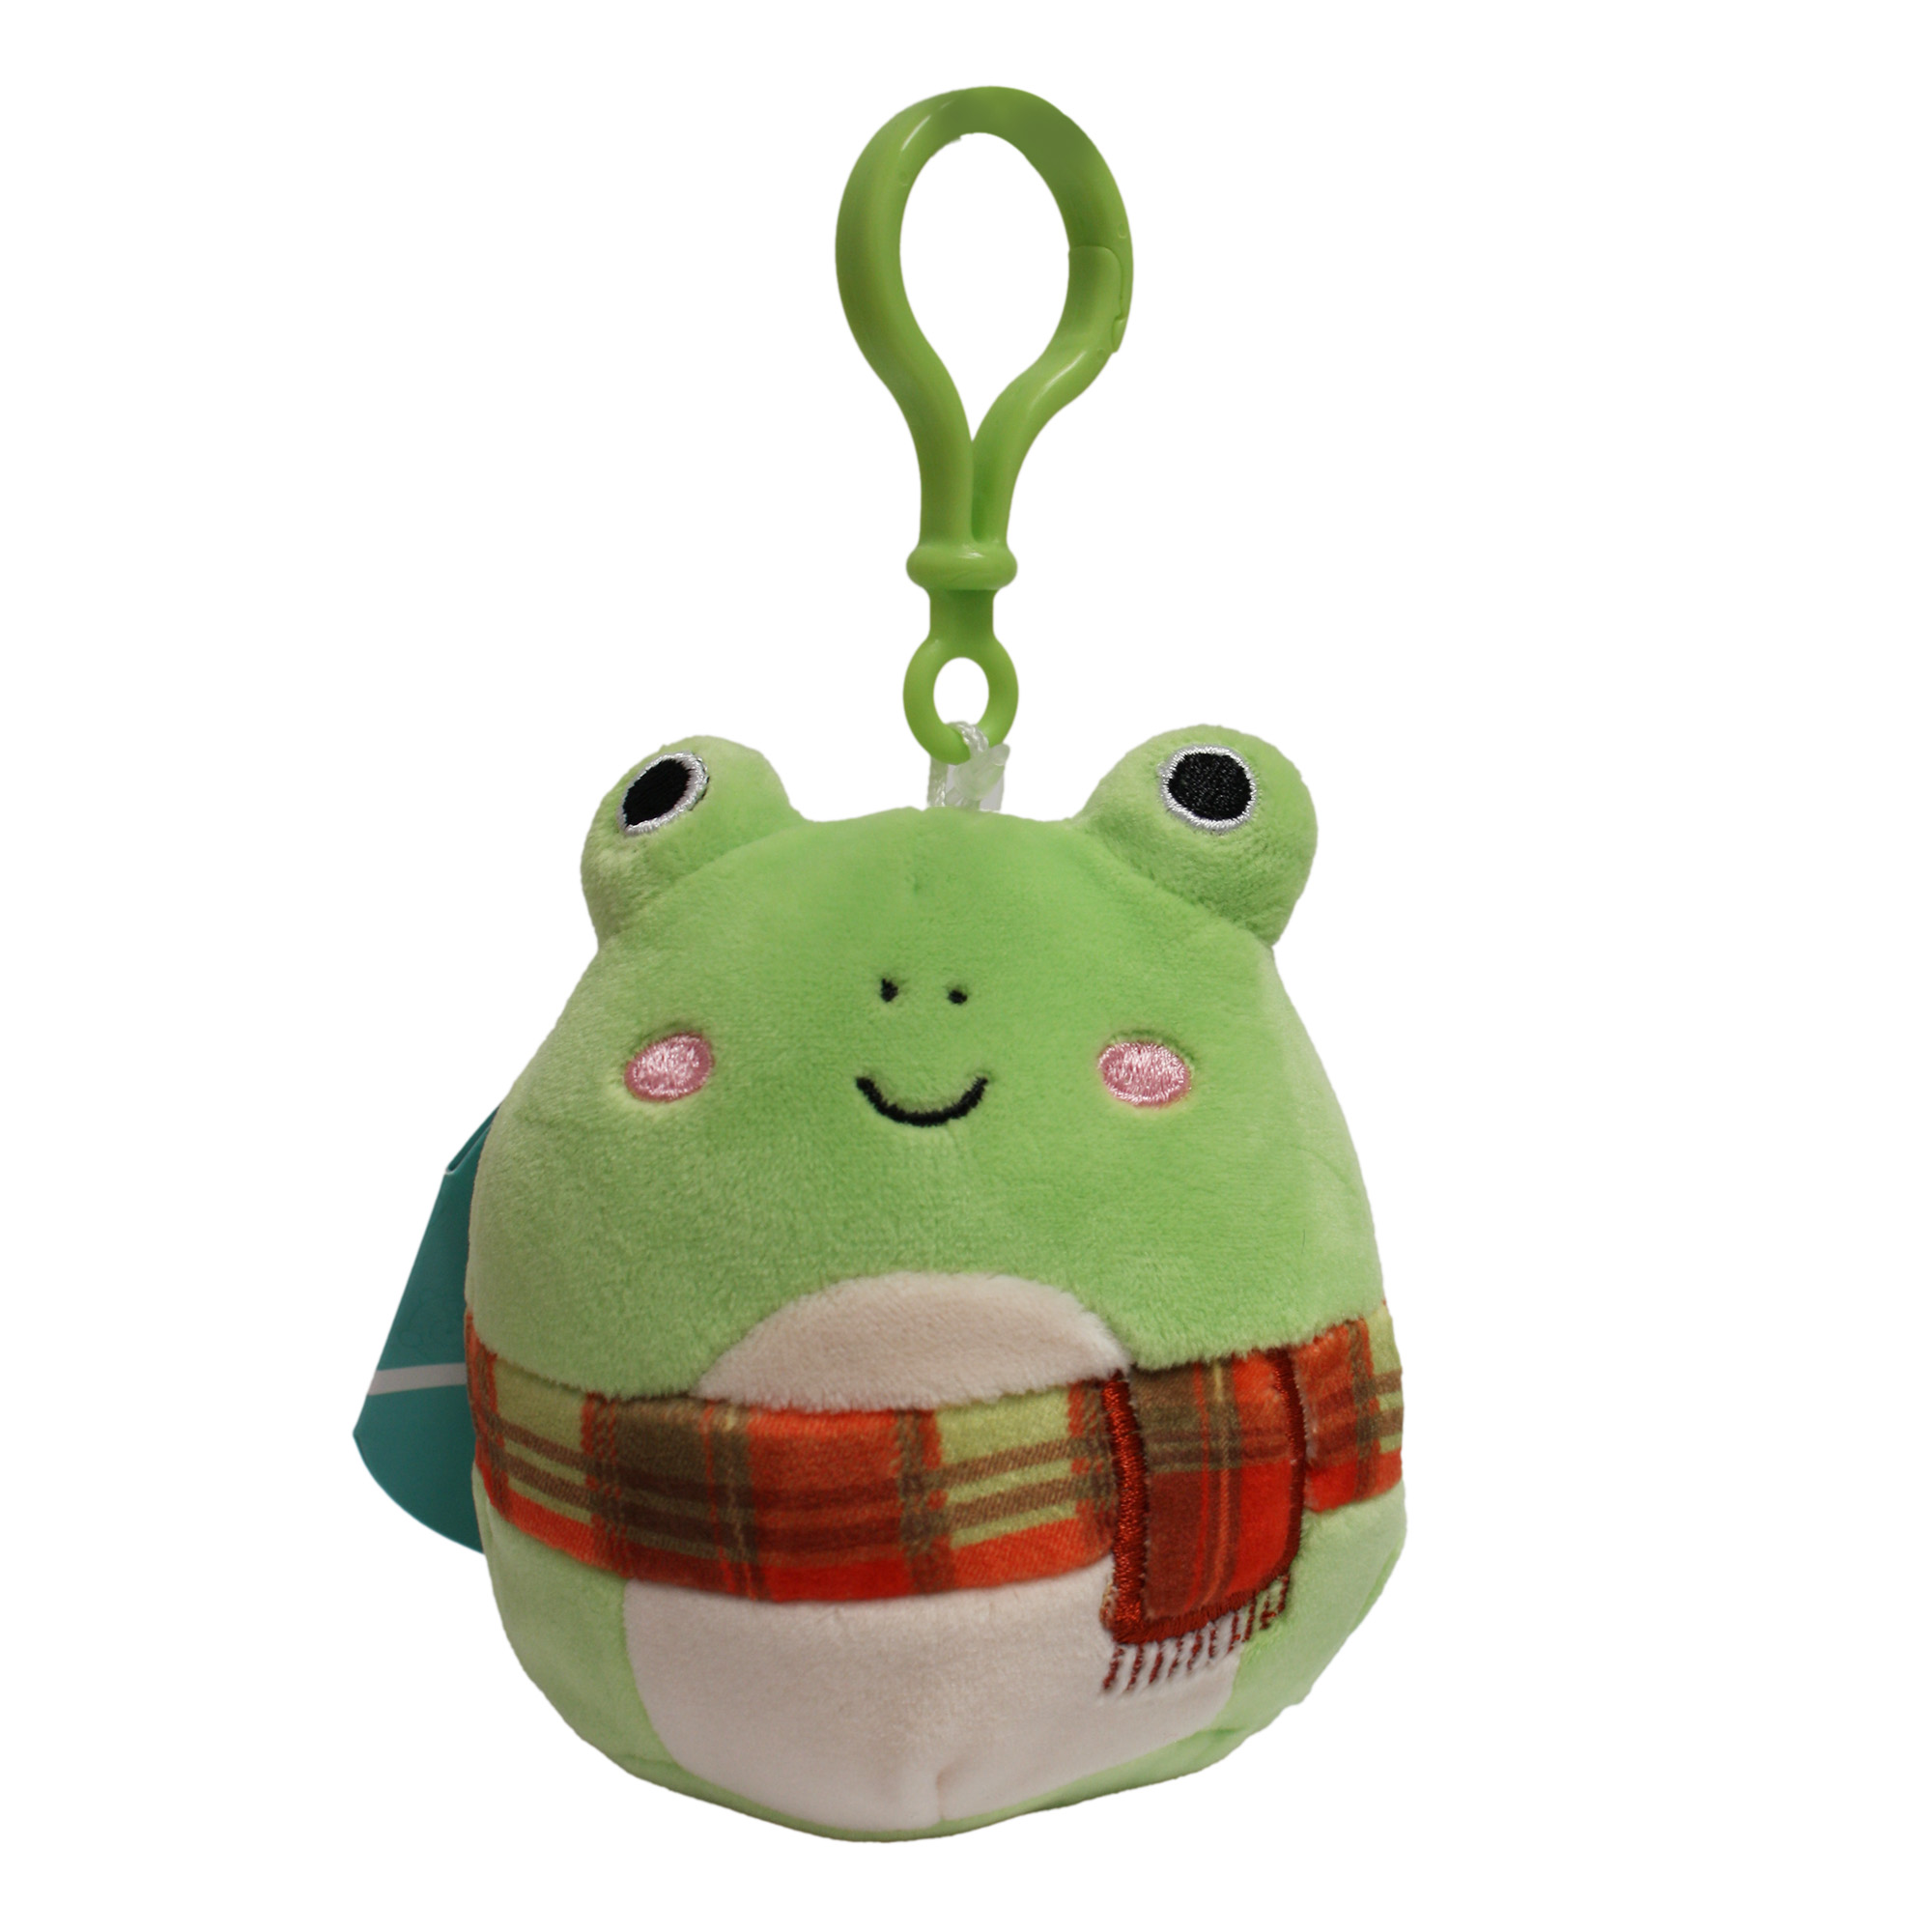 SQUISHMALLOWS - WENDY THE FROG PLUSH KEYCHAIN (3.5)